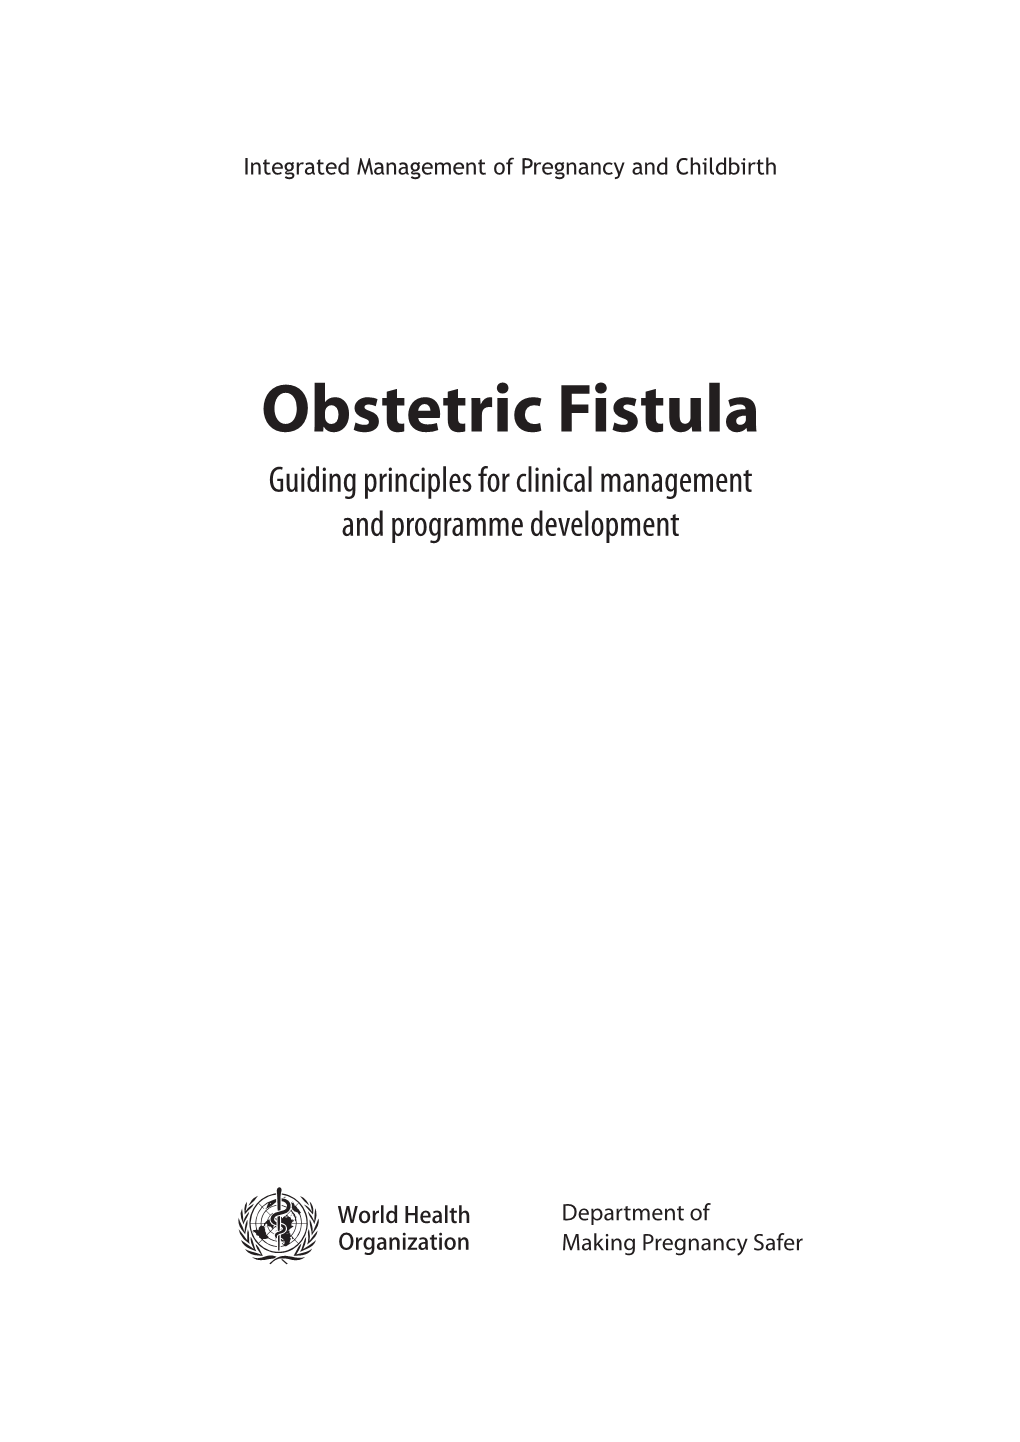 Obstetric Fistula Guiding Principles for Clinical Management and Programme Development